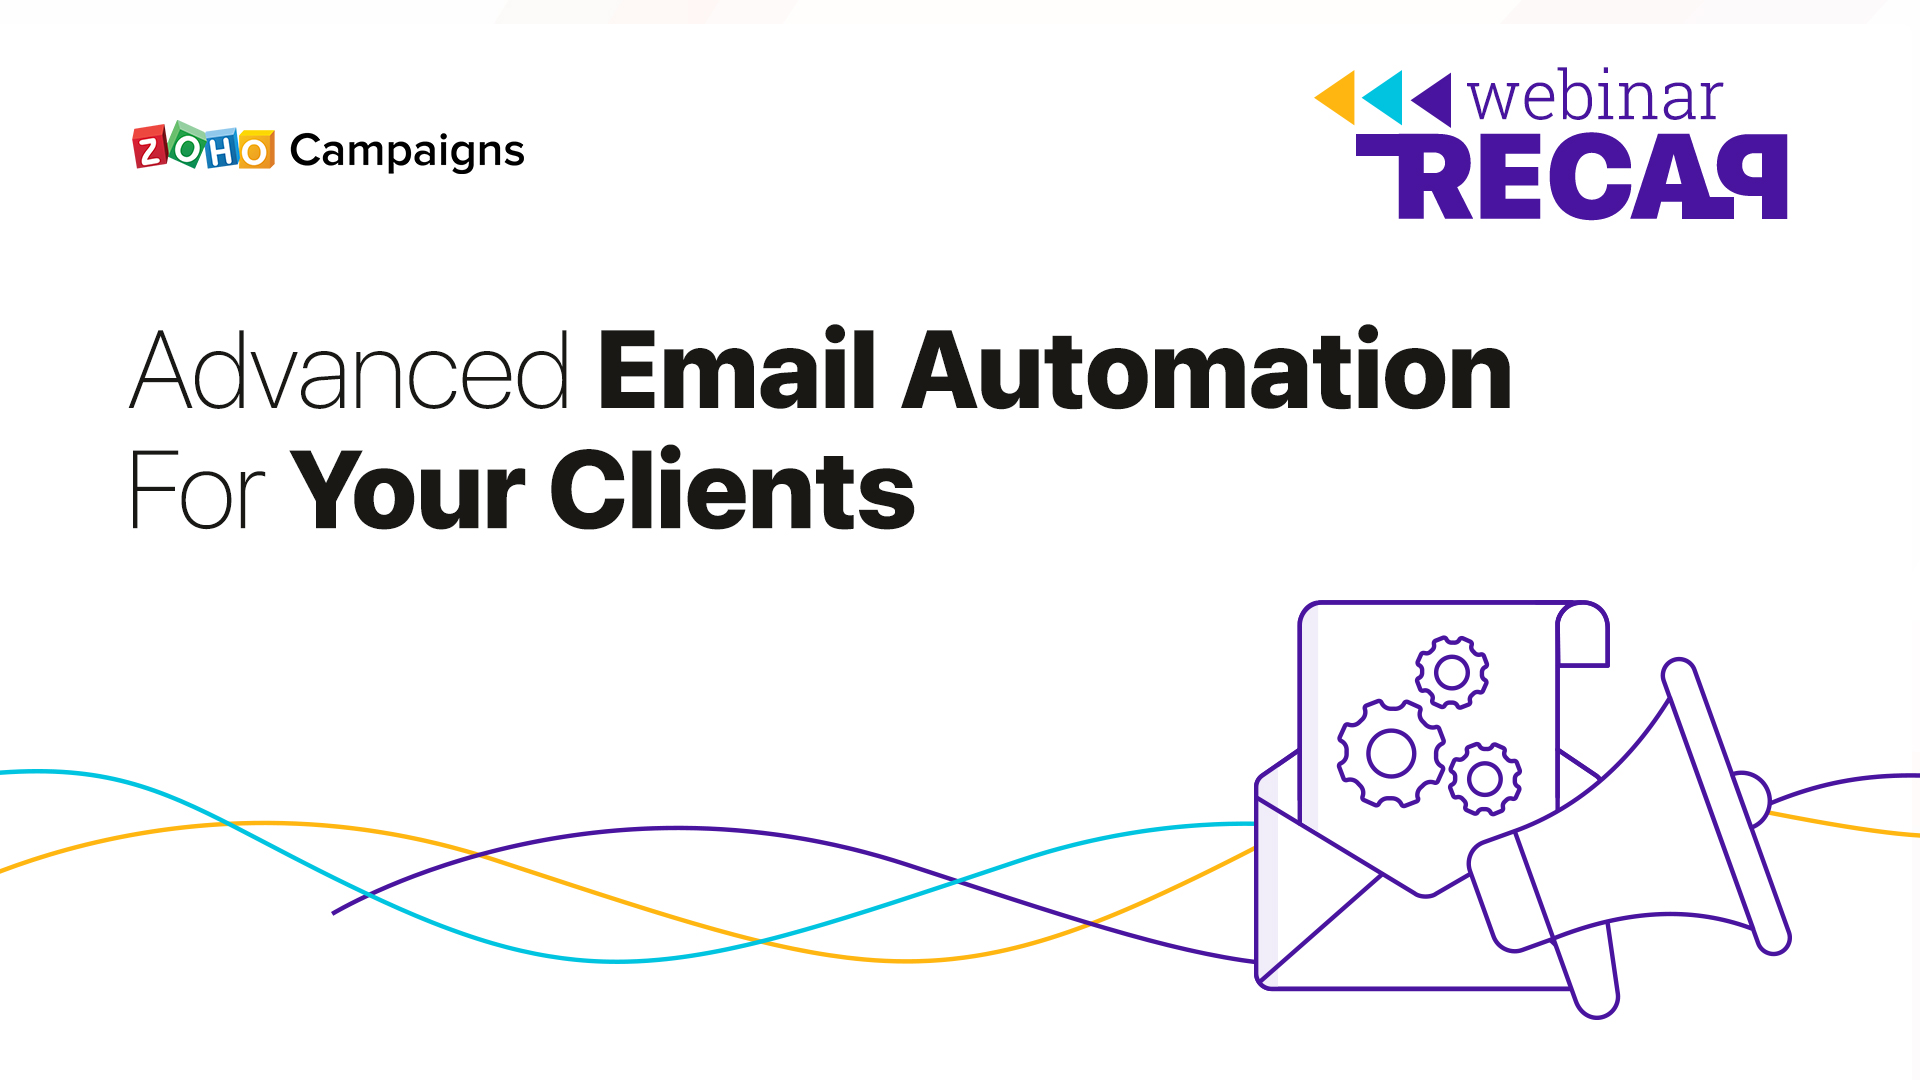 Webinar Recap: Best ways to use advanced email automation for your clients